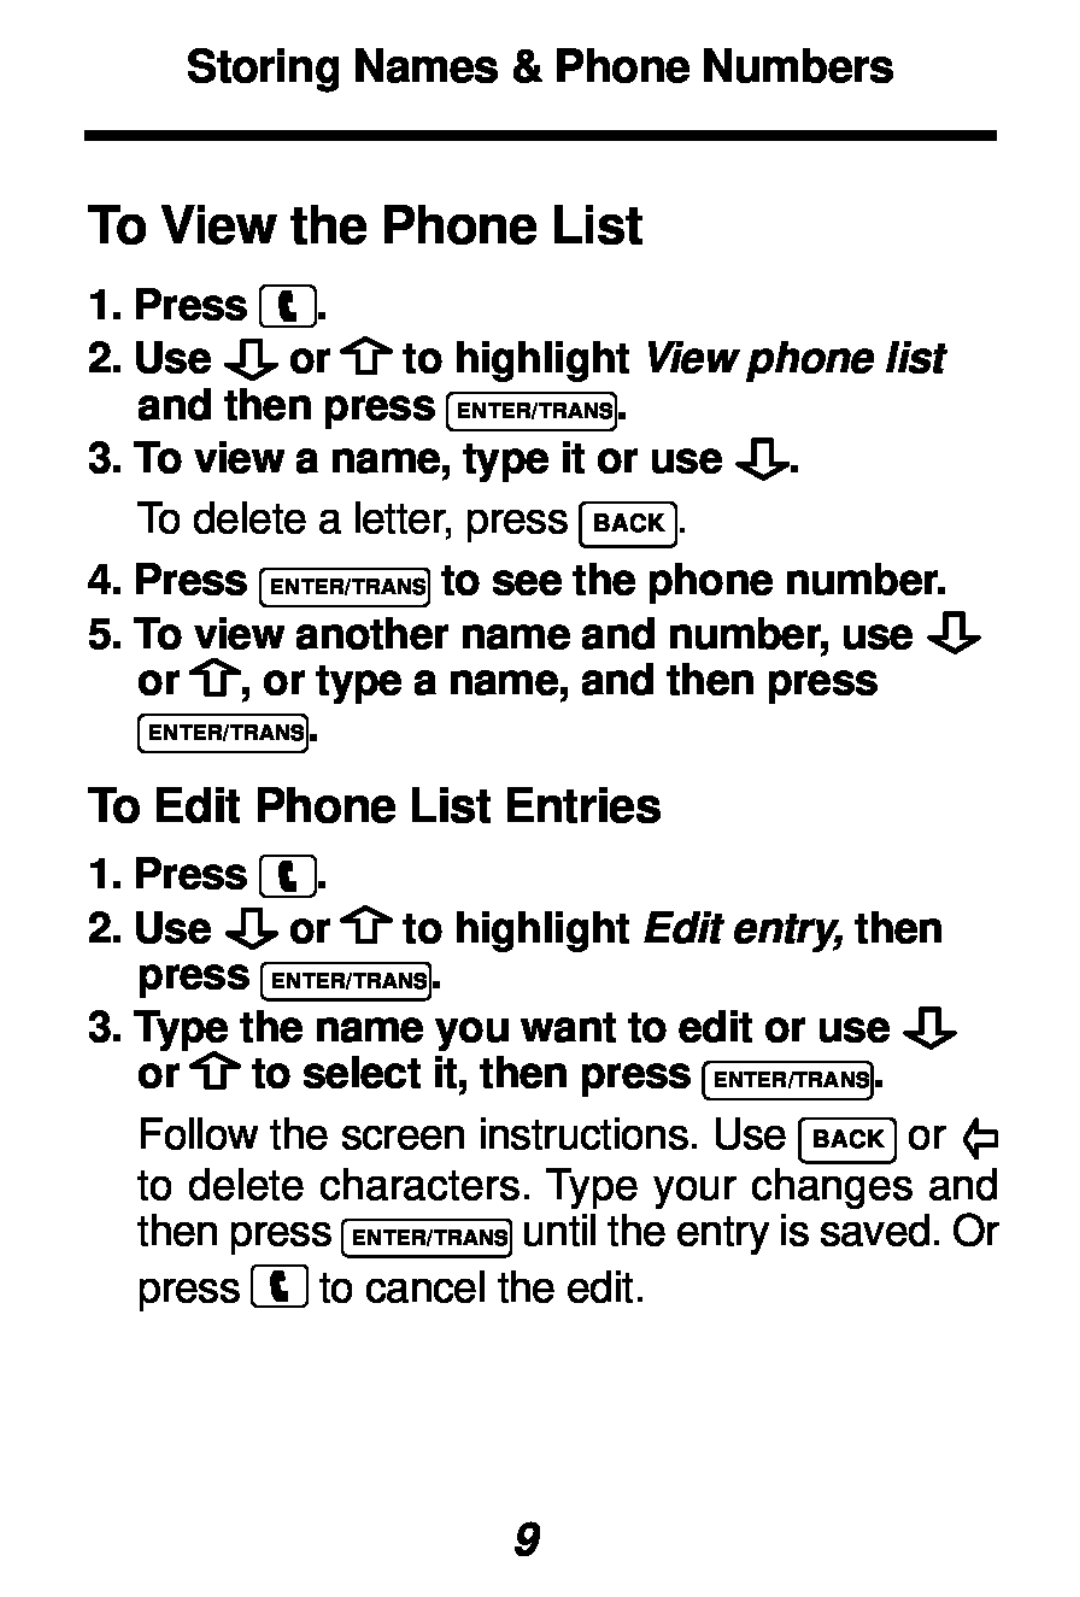 Franklin TES-106 manual To View the Phone List, To Edit Phone List Entries, Storing Names & Phone Numbers 